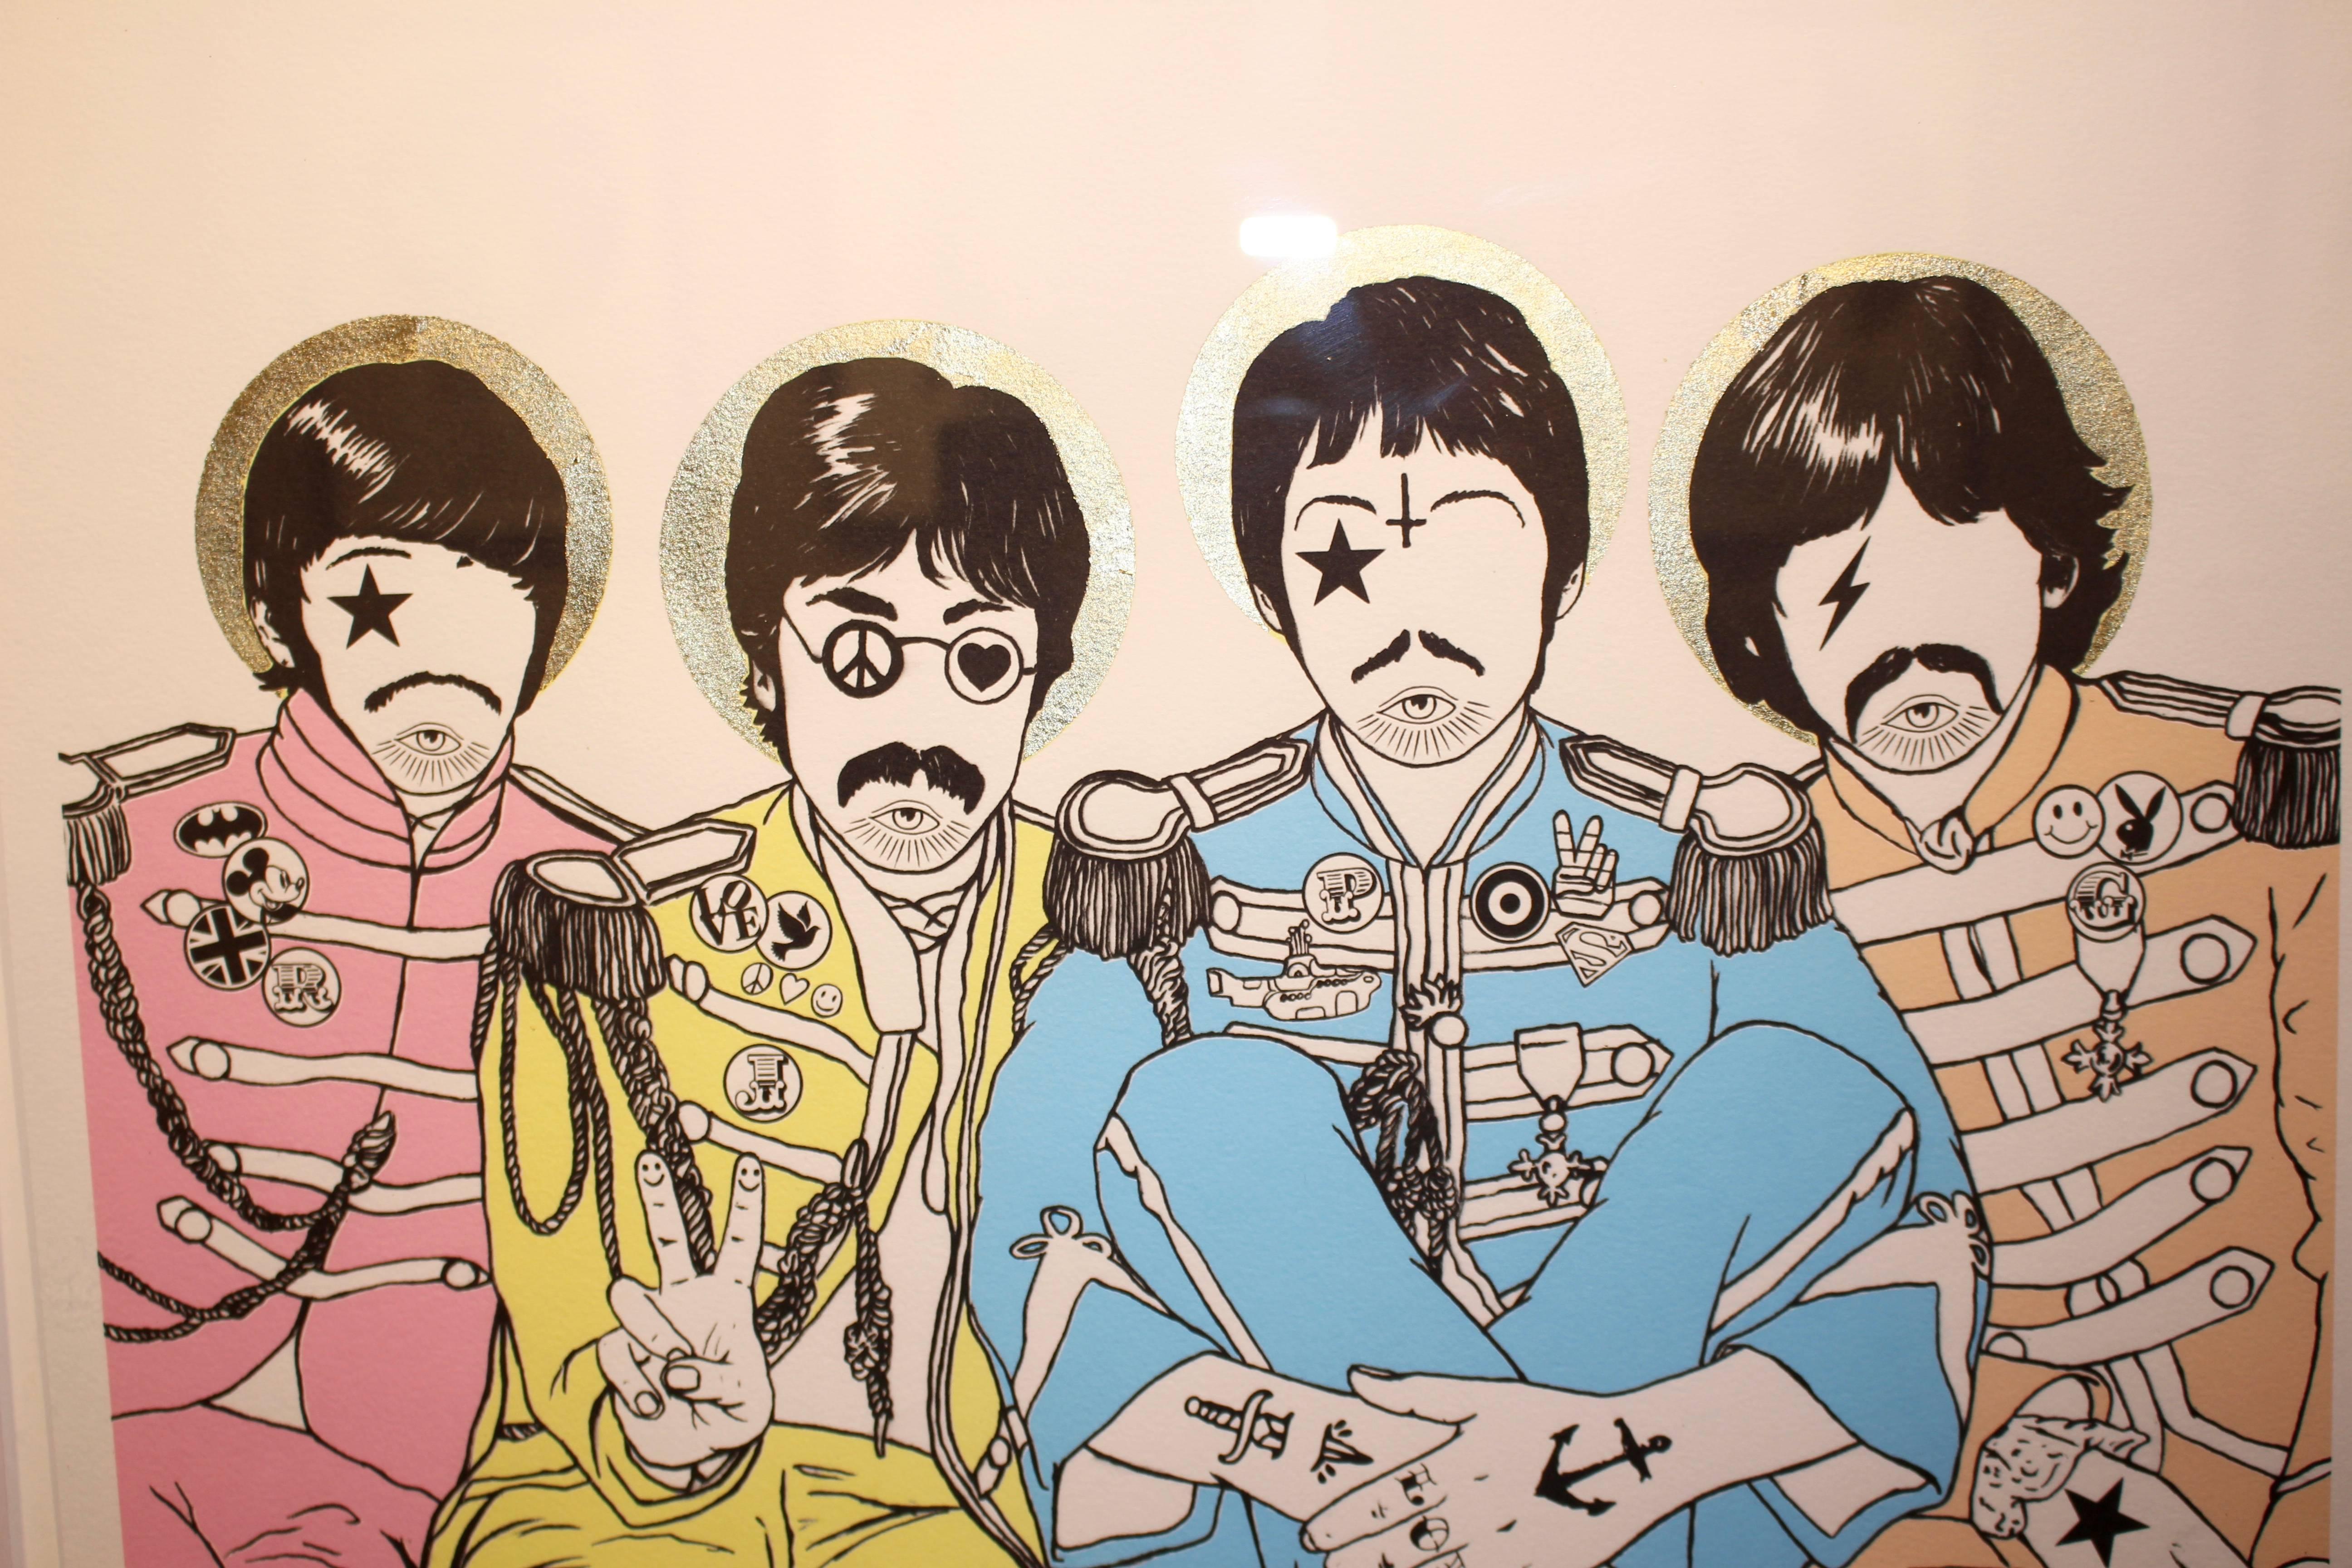 The Lonely Hearts - Beatles - Street Art Print by Rugman